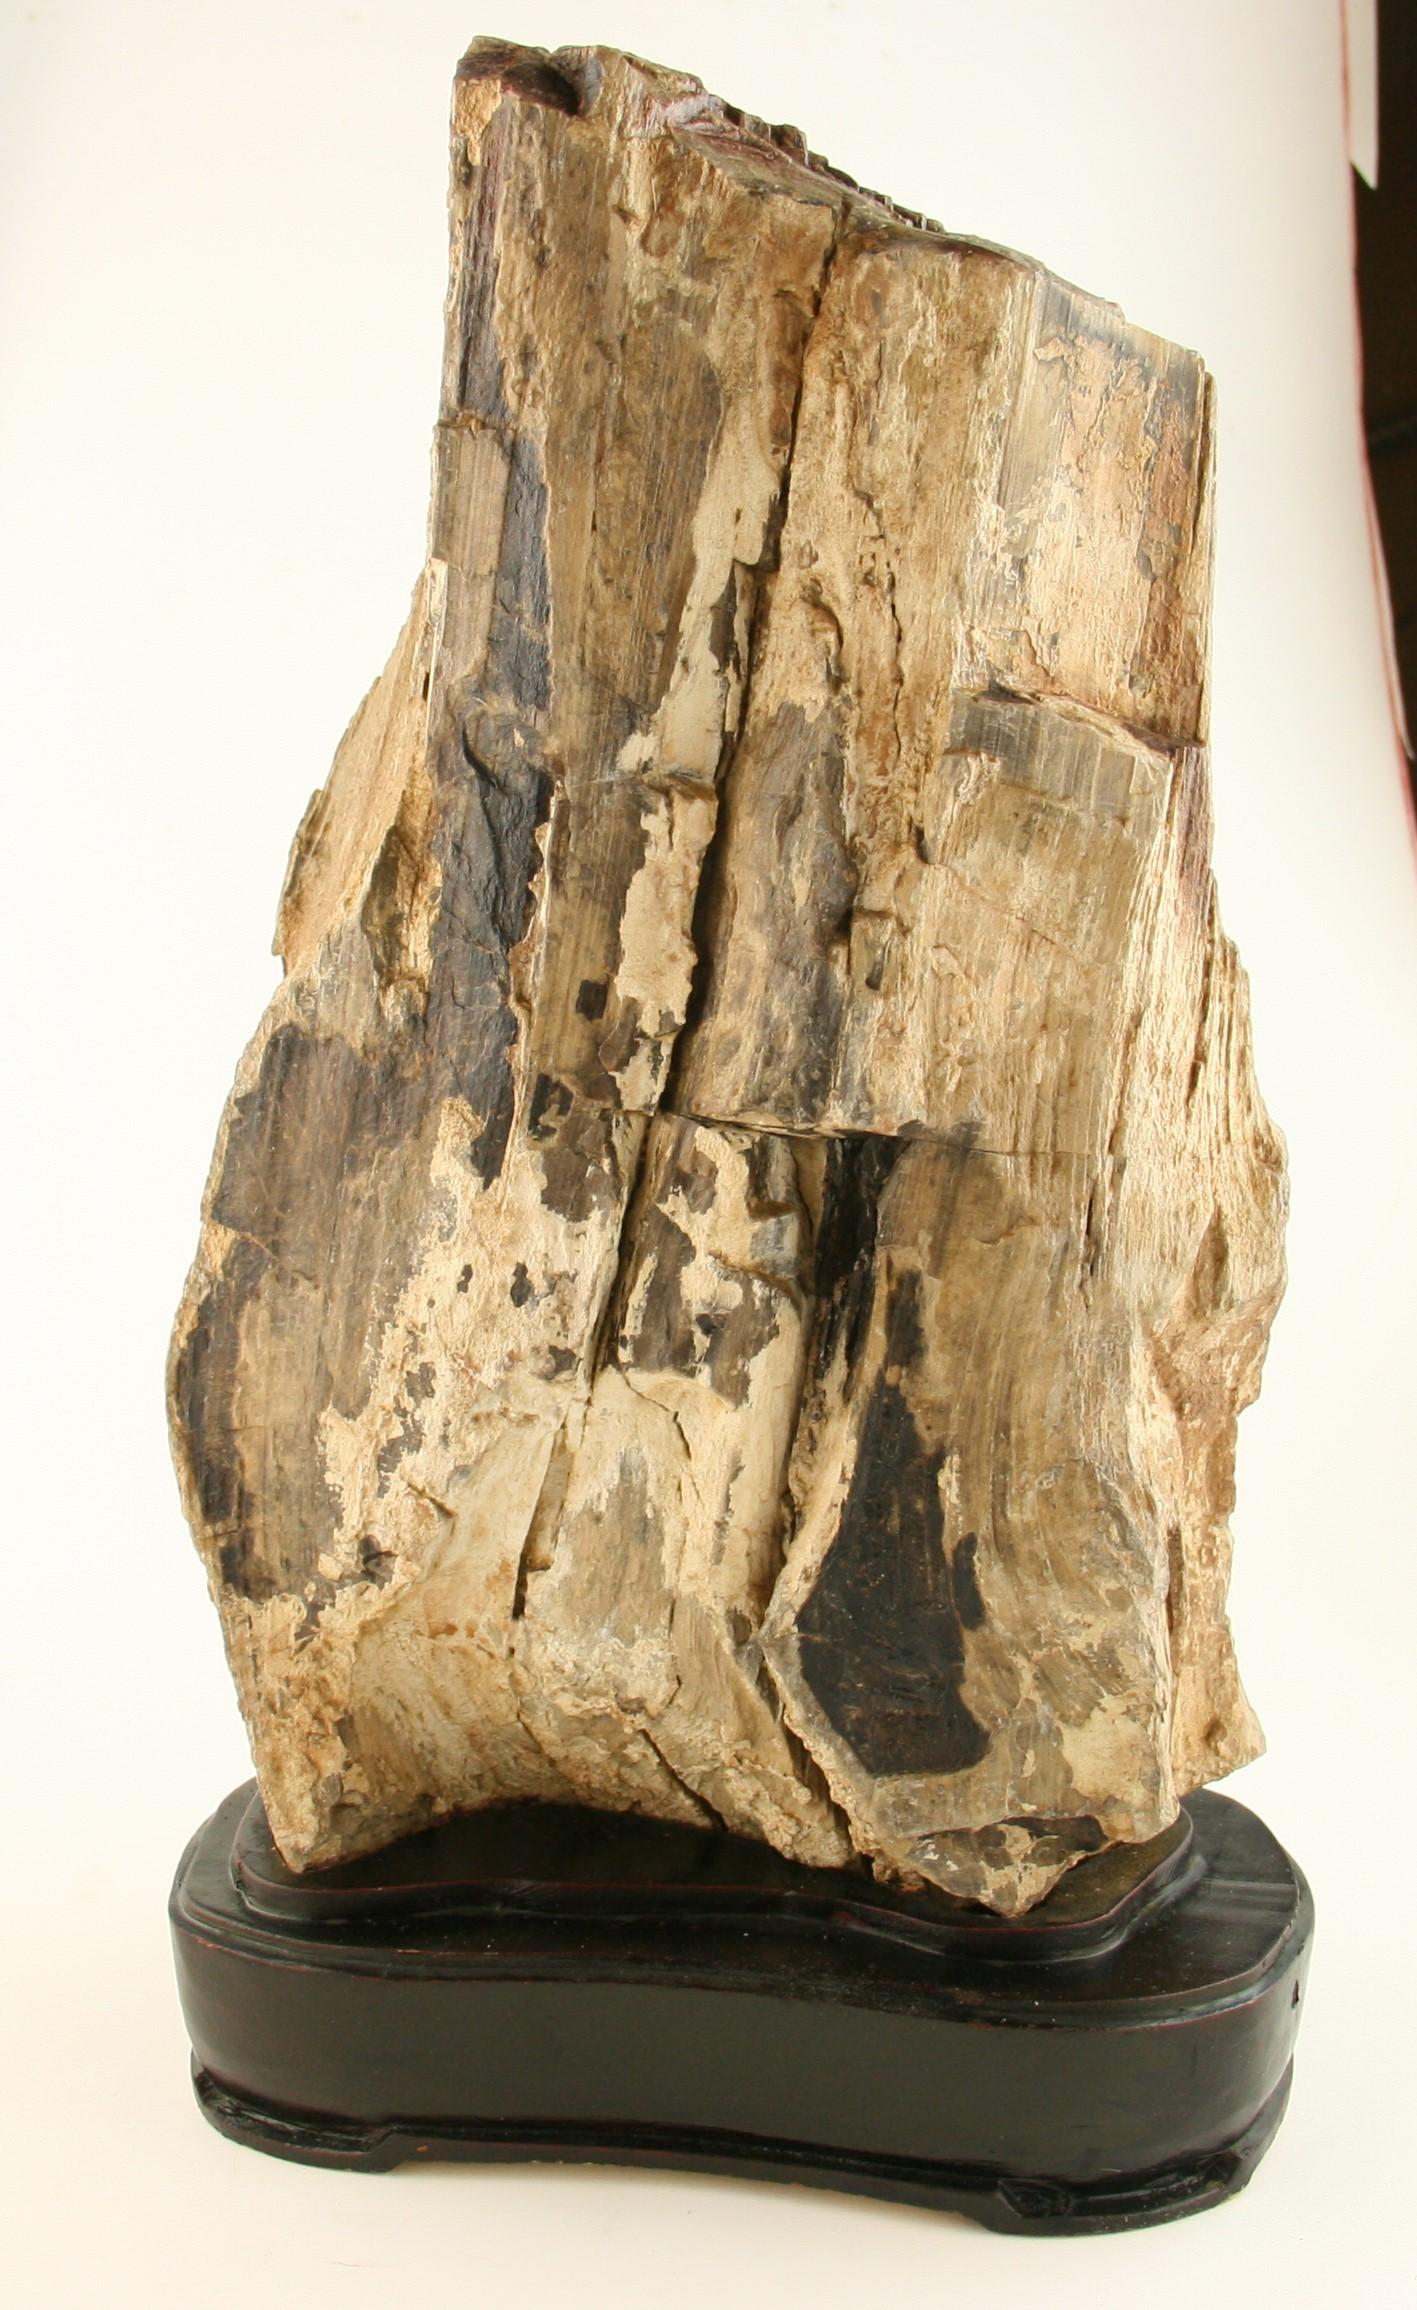 8-238 Earth tone unpolished petrified wood set on a custom wood base as a sculpture showing all the texture of the original wood.